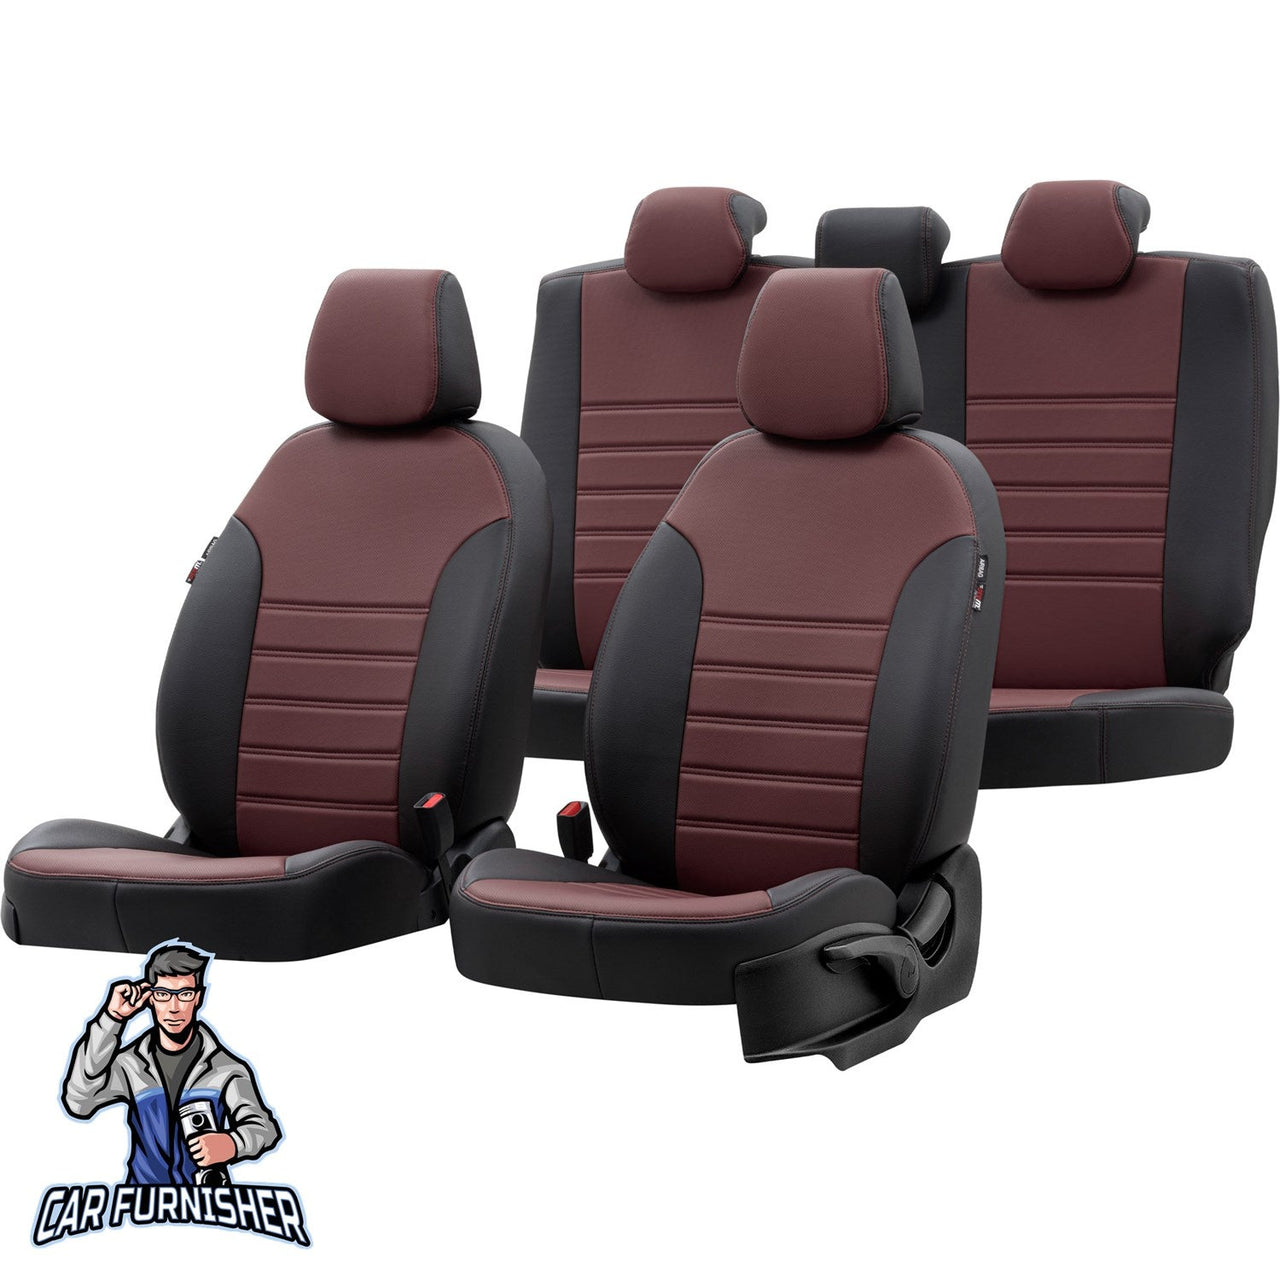 Toyota Aygo Seat Cover Istanbul Leather Design Burgundy Leather